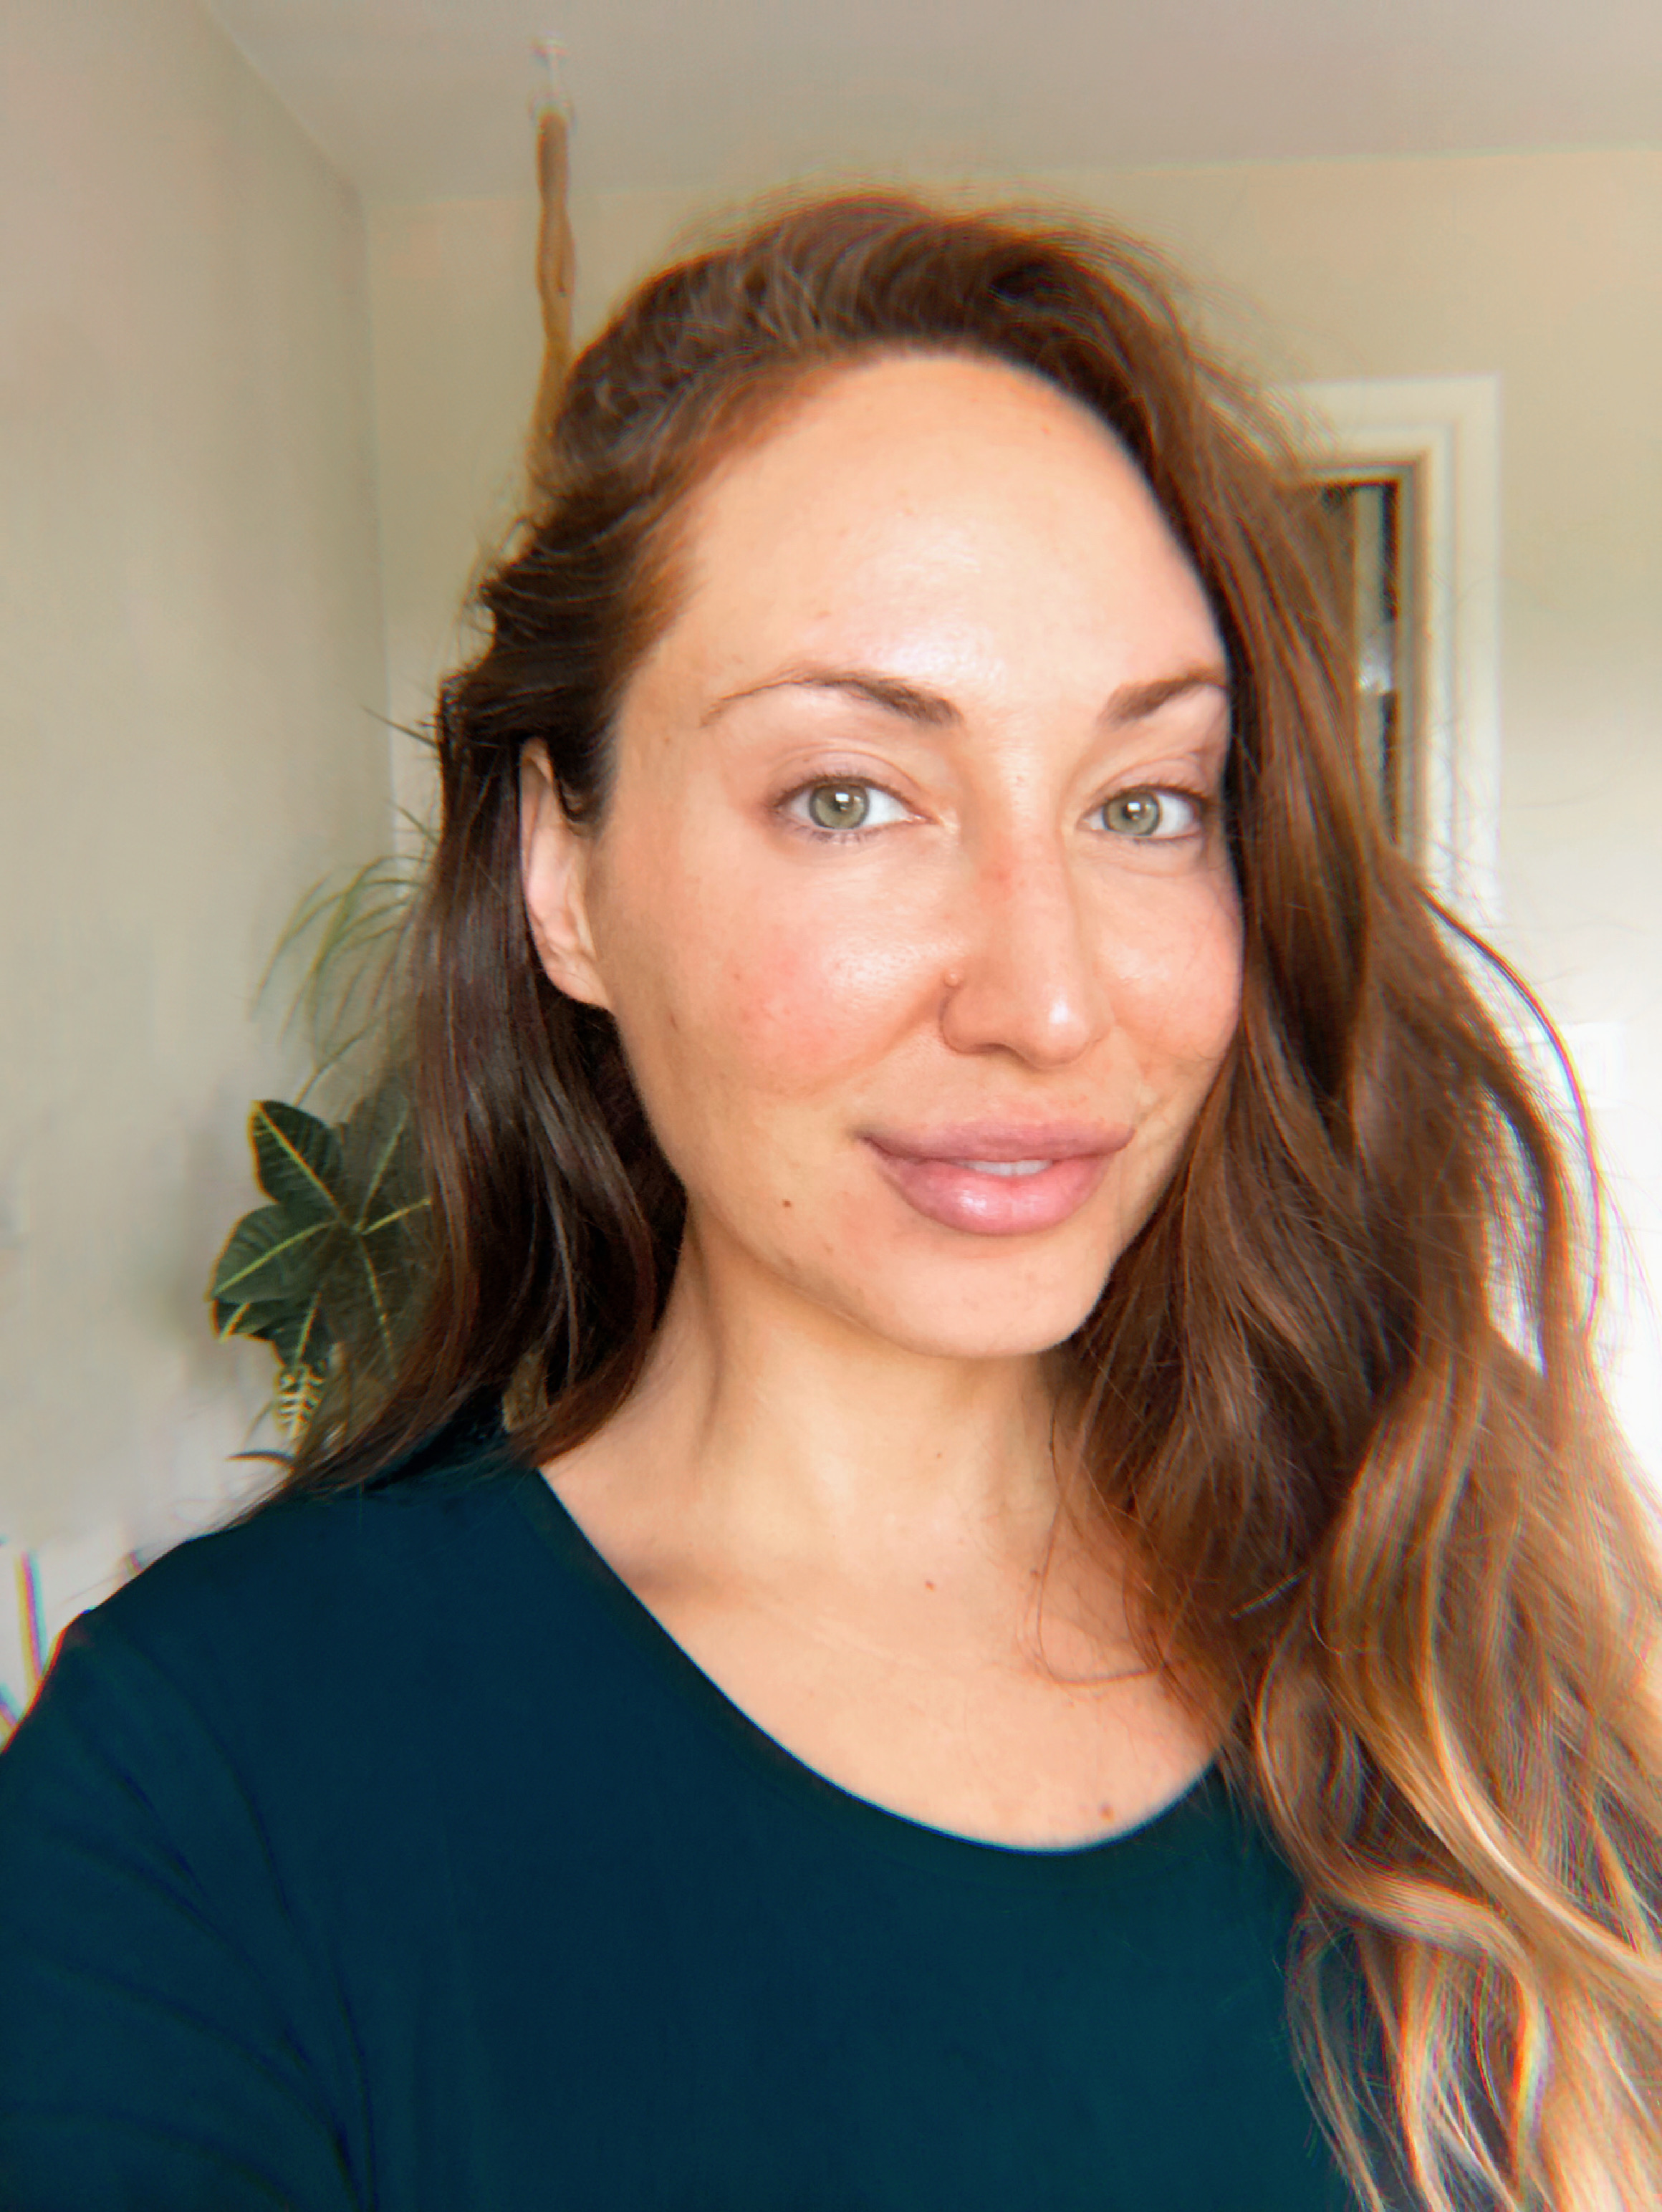 Morning Skincare Routine for Healthy Glowing Skin Vegan Skincare Vegan Beauty A Blog About Stuff Selfie Glow 2